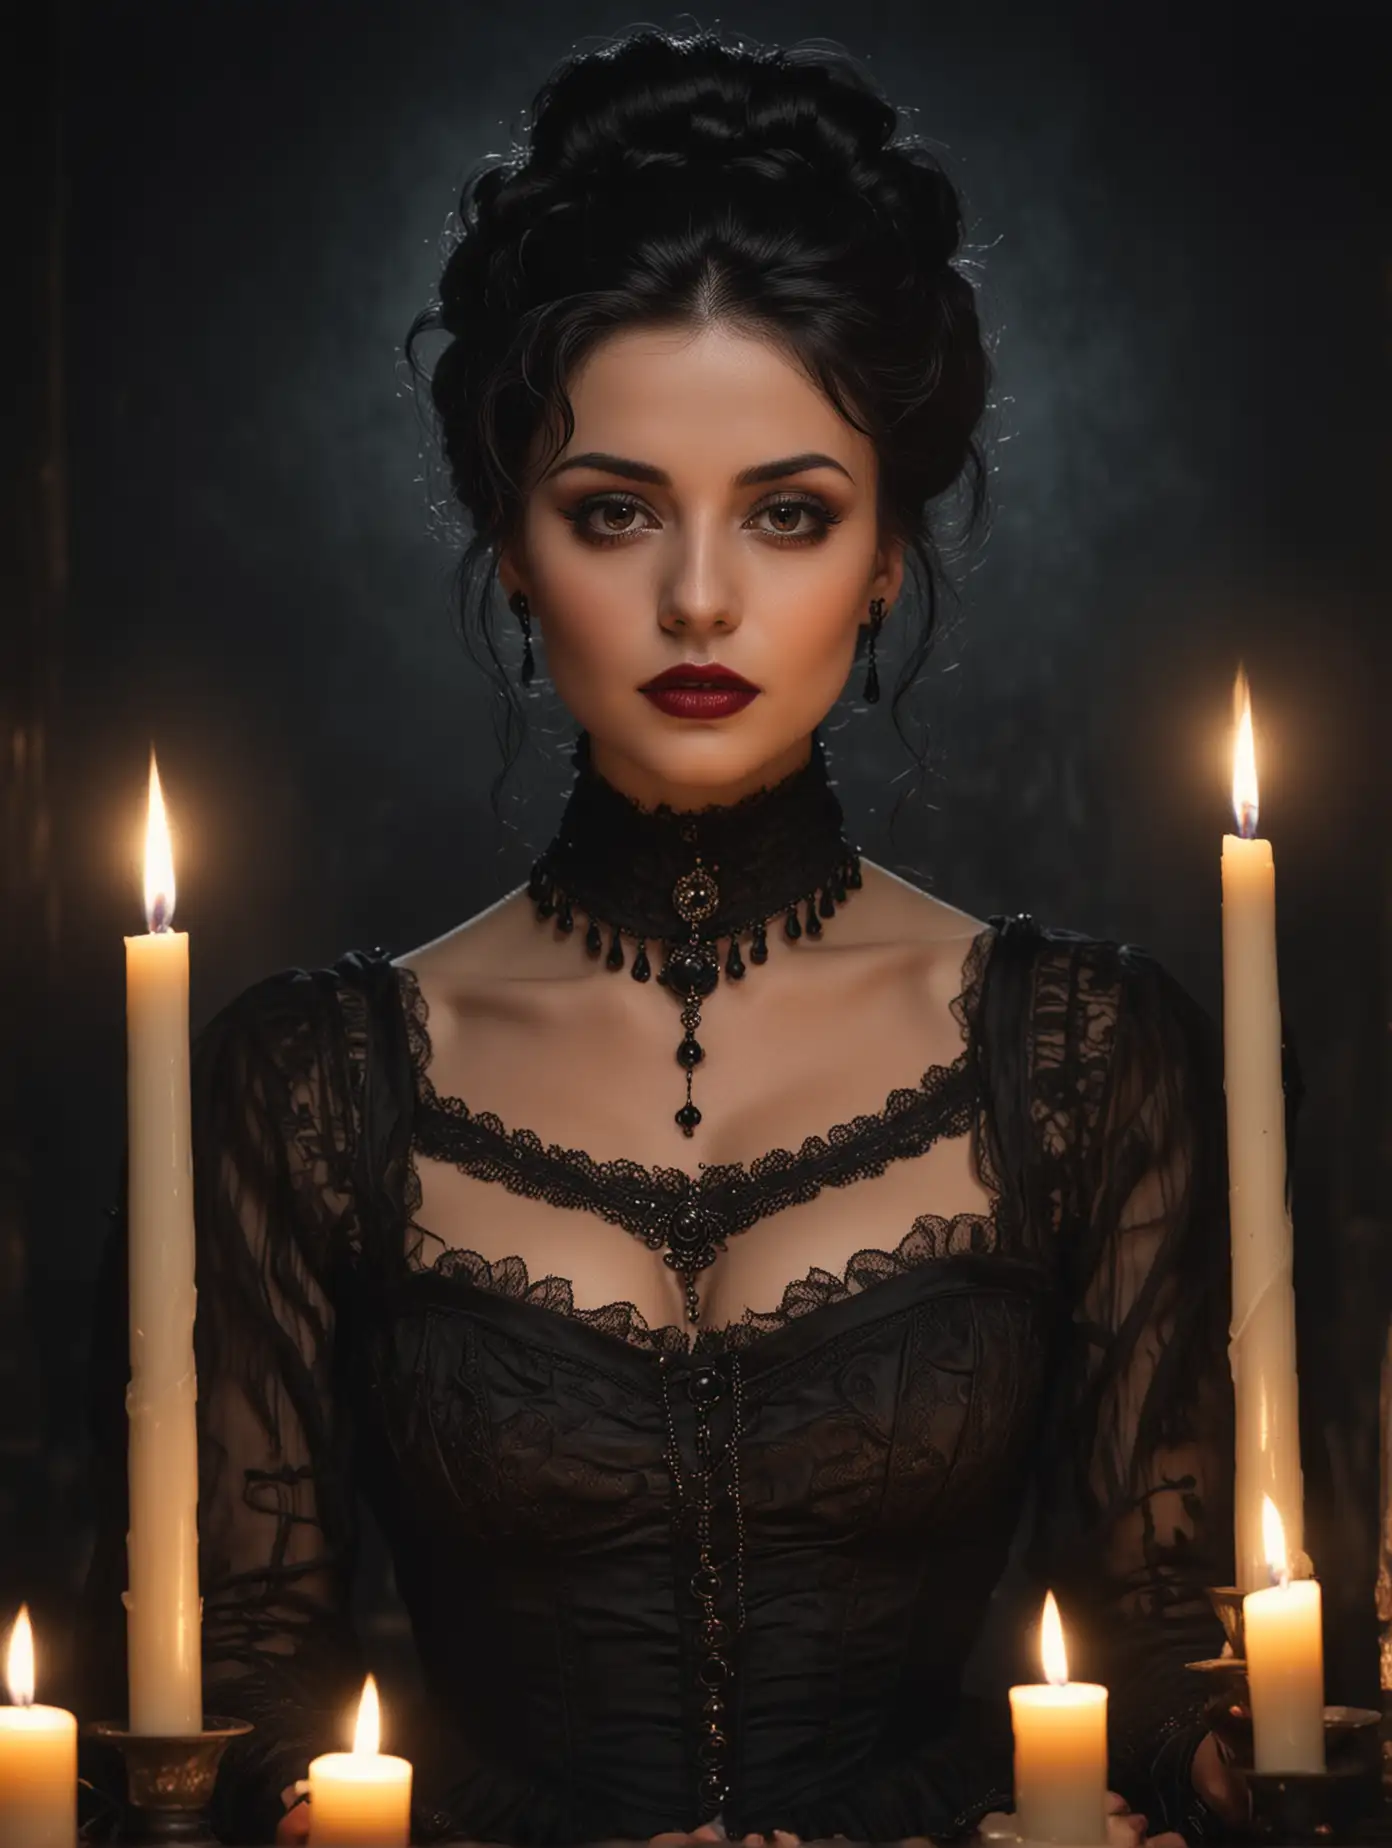 Gothic Victorian Woman Portrait with Lit Candles